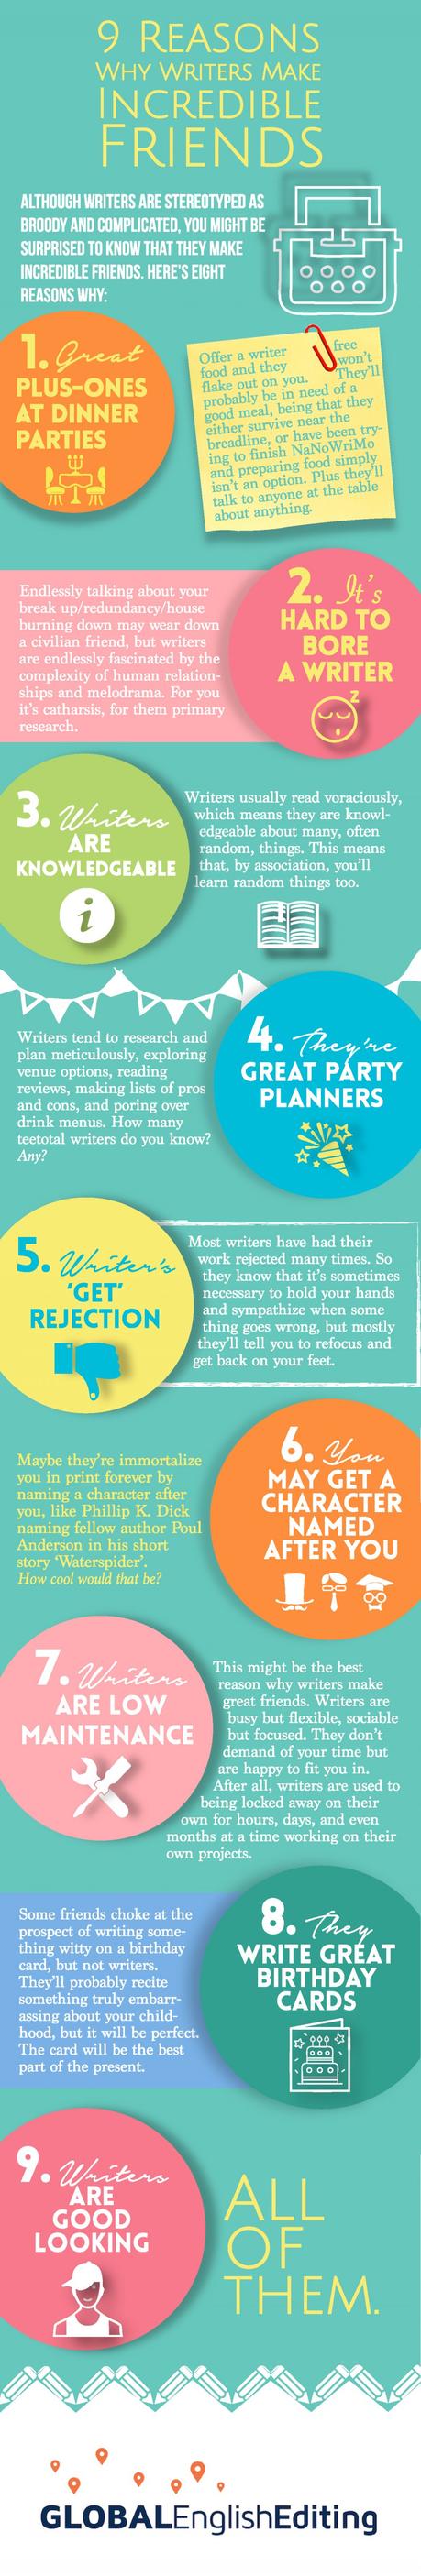 Why Writers Make Incredible Friends infographic